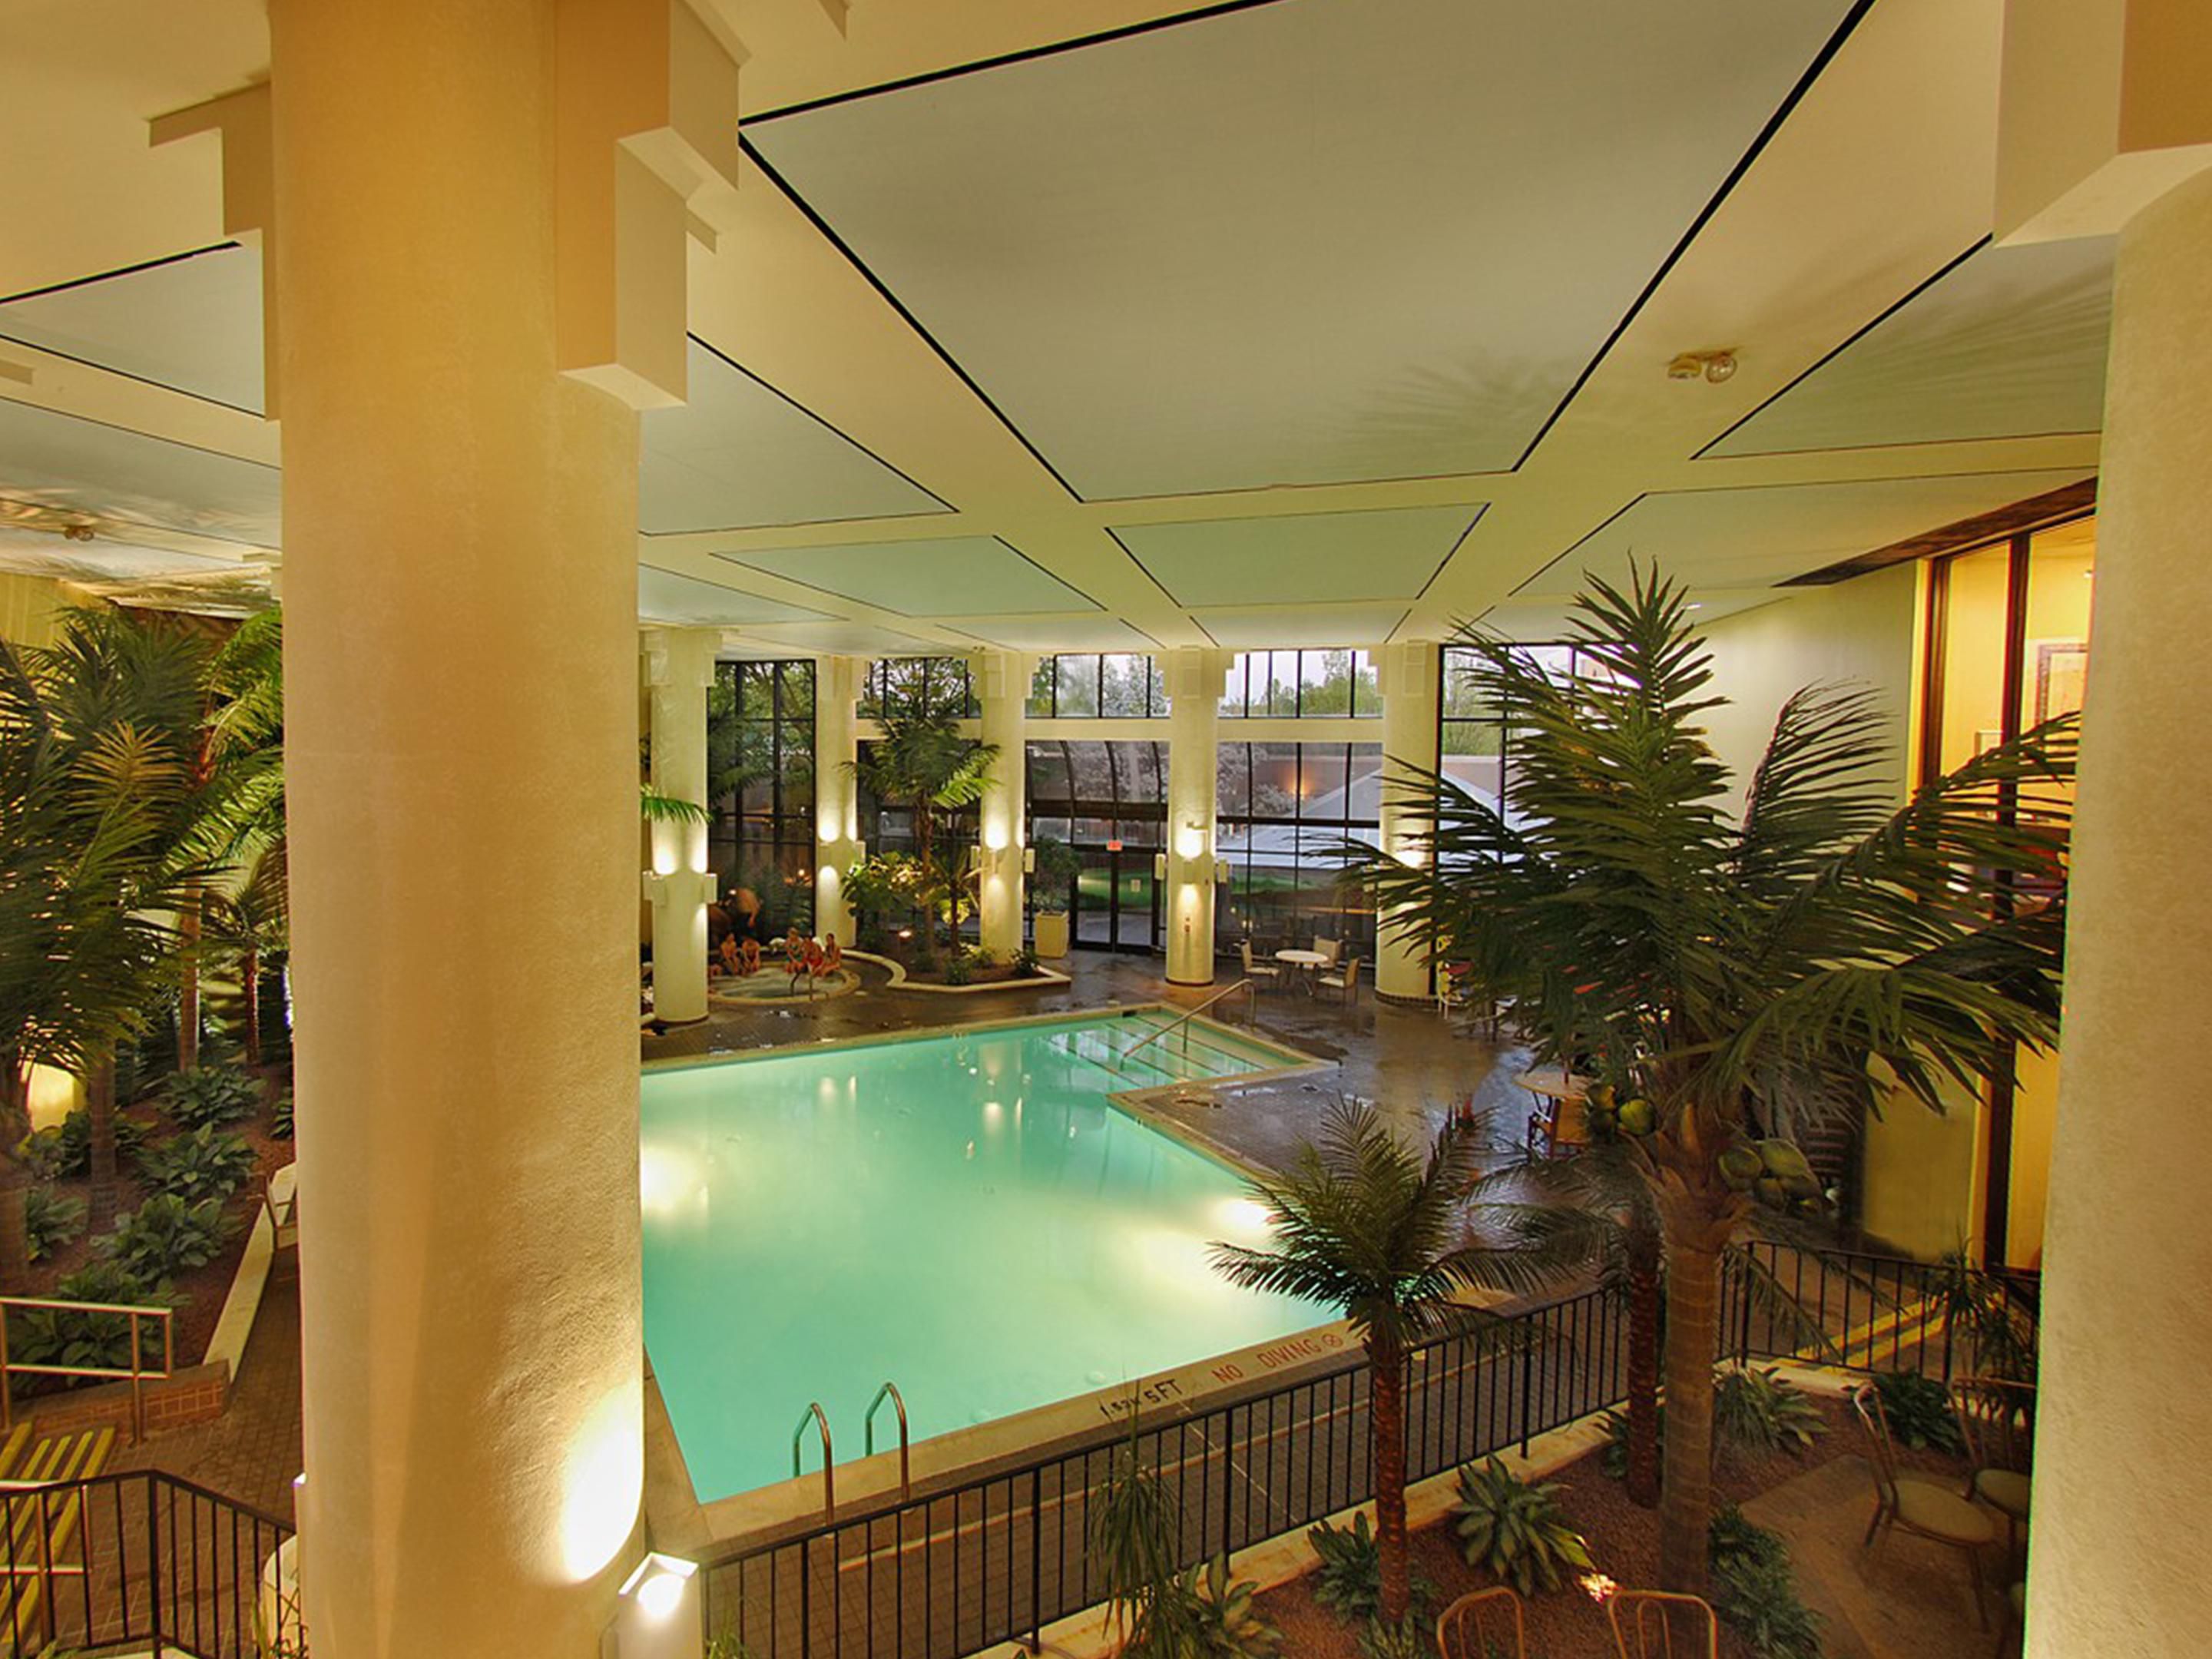 Take a dip in our heated indoor swimming pool, open year-round for the enjoyment of our guests.